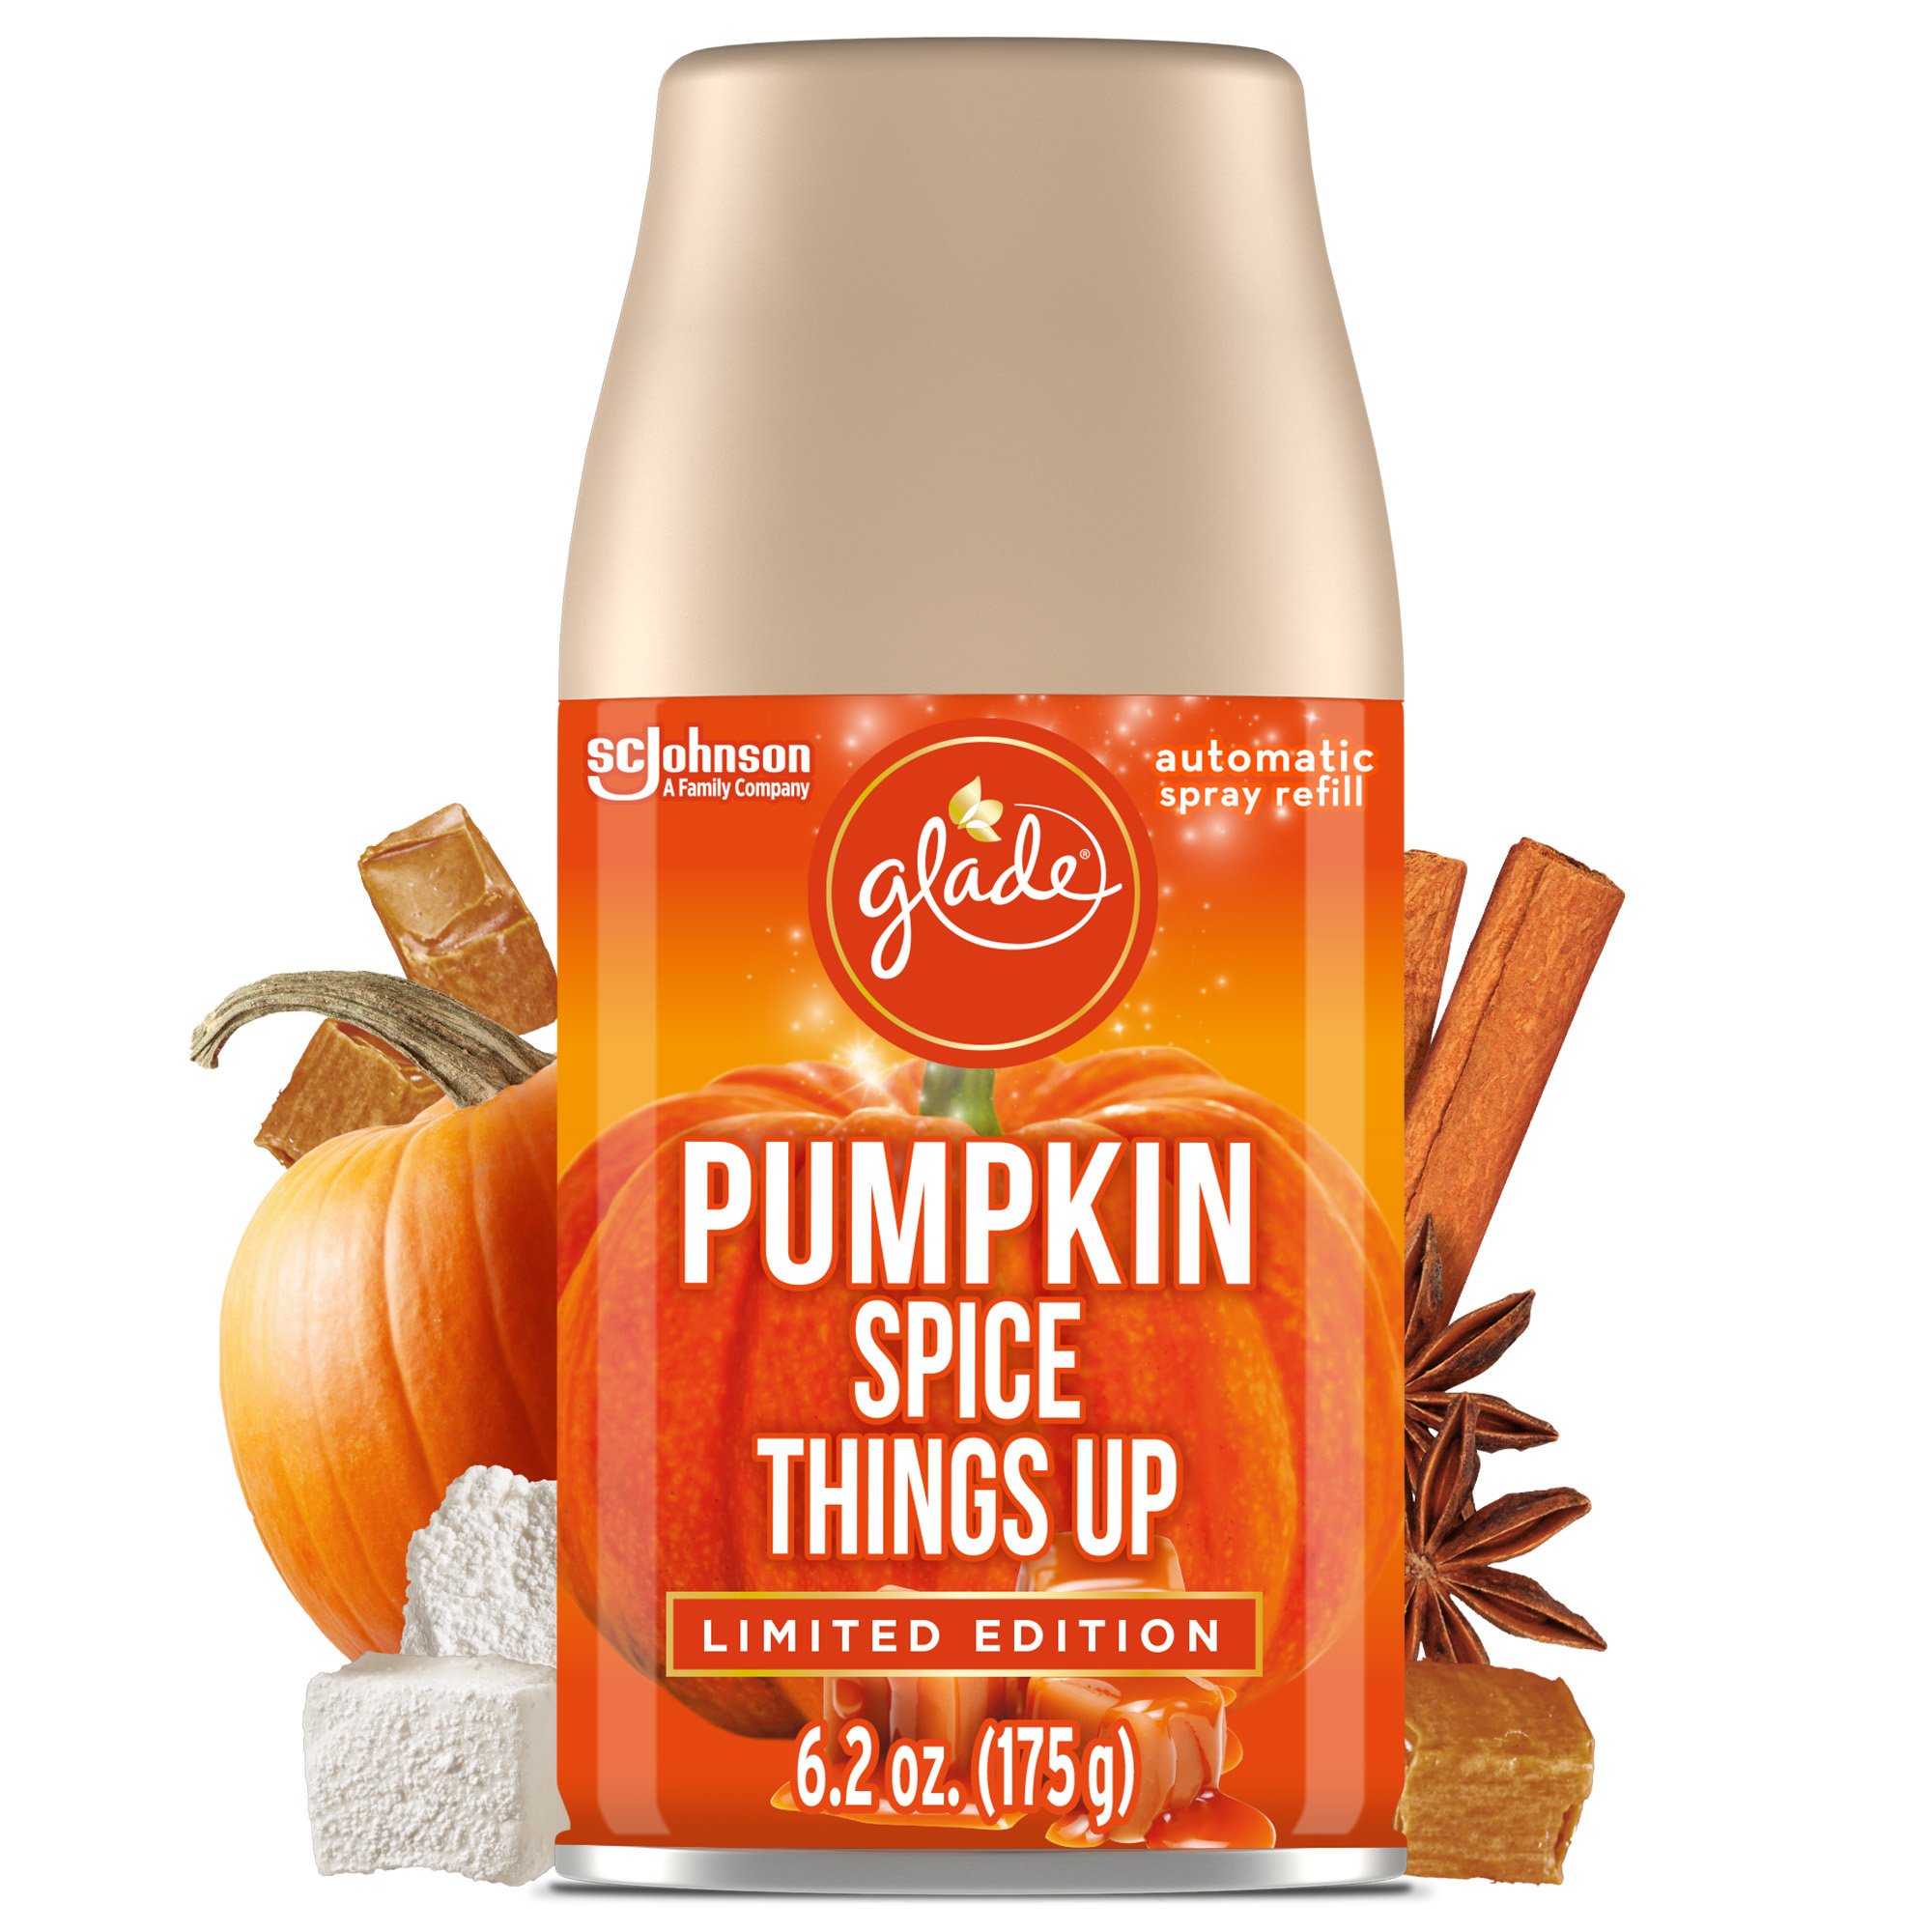 Glade Pumpkin Spice Things Up Automatic Spray Refill Shop Air Fresheners At H E B